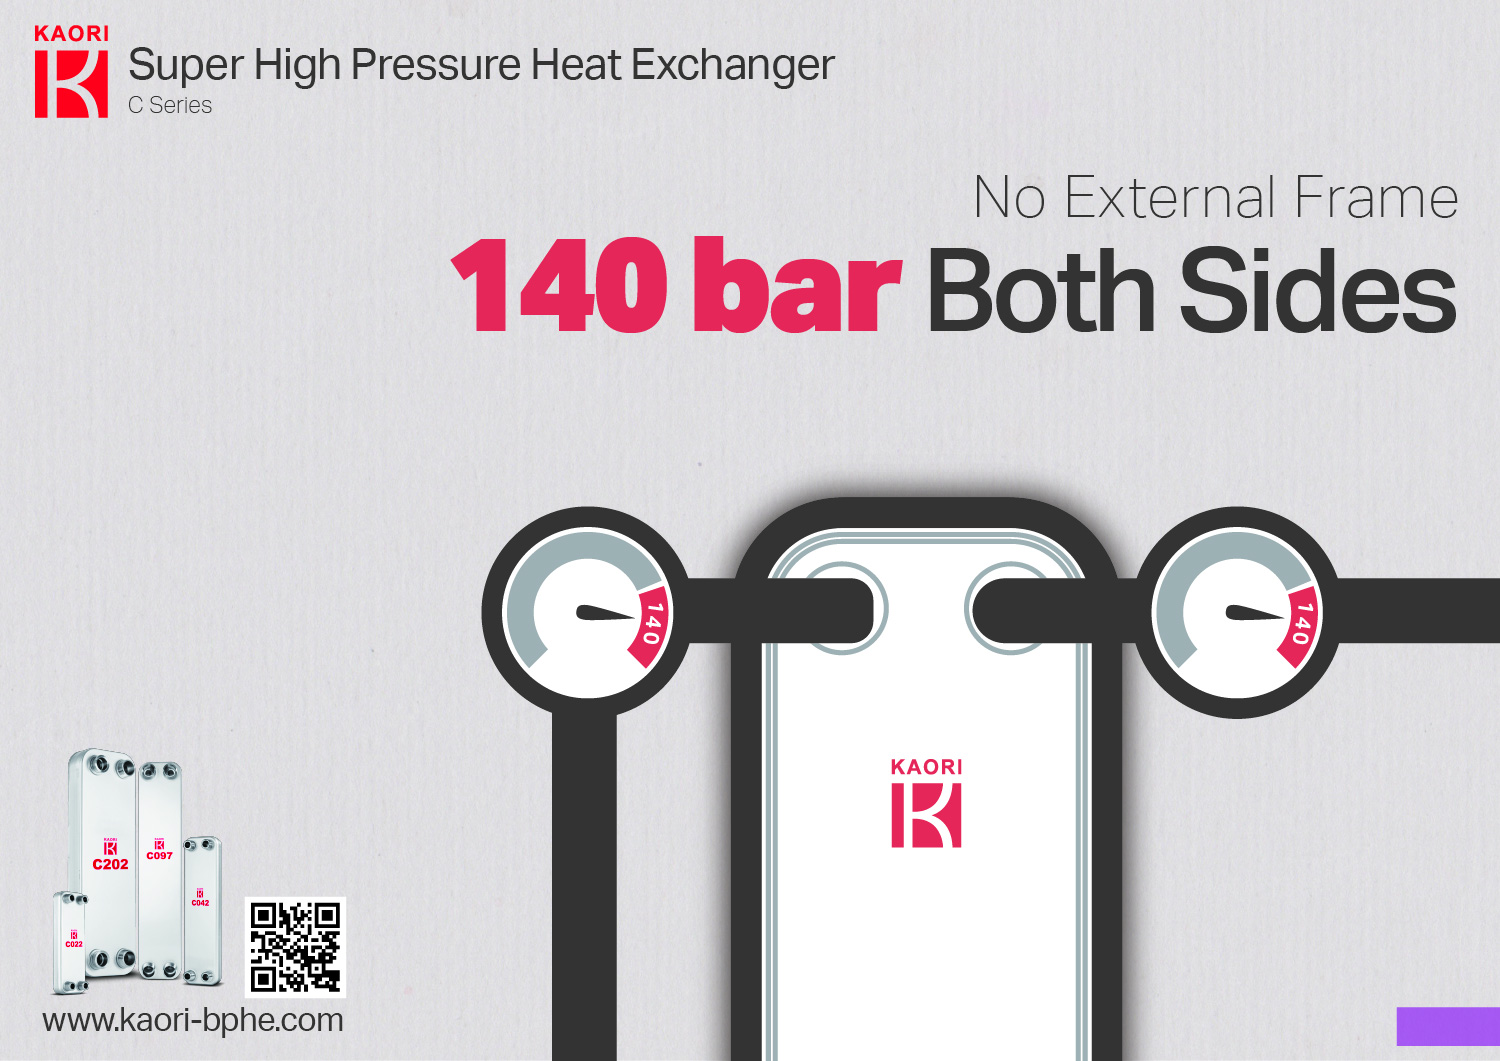  KAORI Ultra High Pressure Heat Exchanger Prefect Solution to Expand Your CO2 Systems Portfolio with C Series 